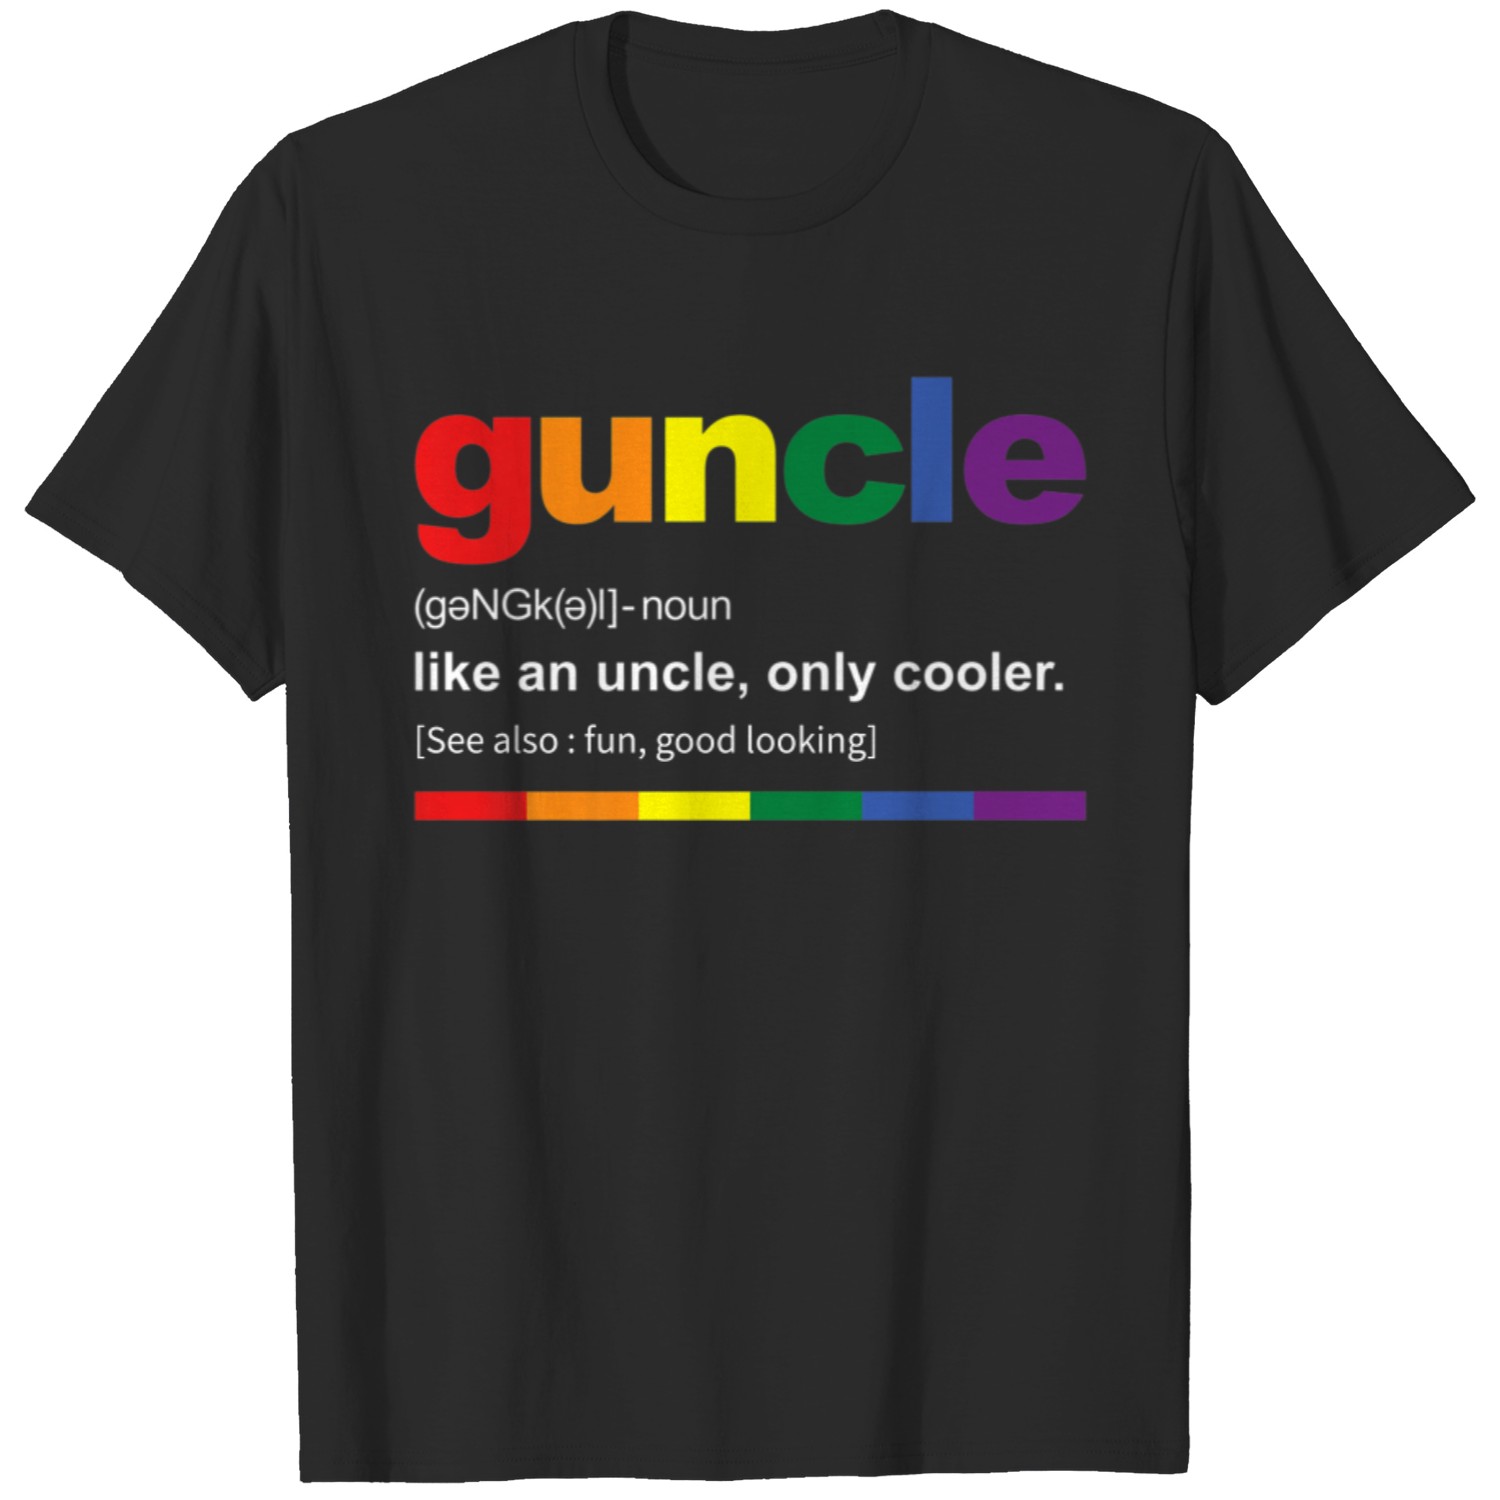 T-Shirt Rainbow Pride Color Funny Gift for Gay Uncle Tops Tees for Men